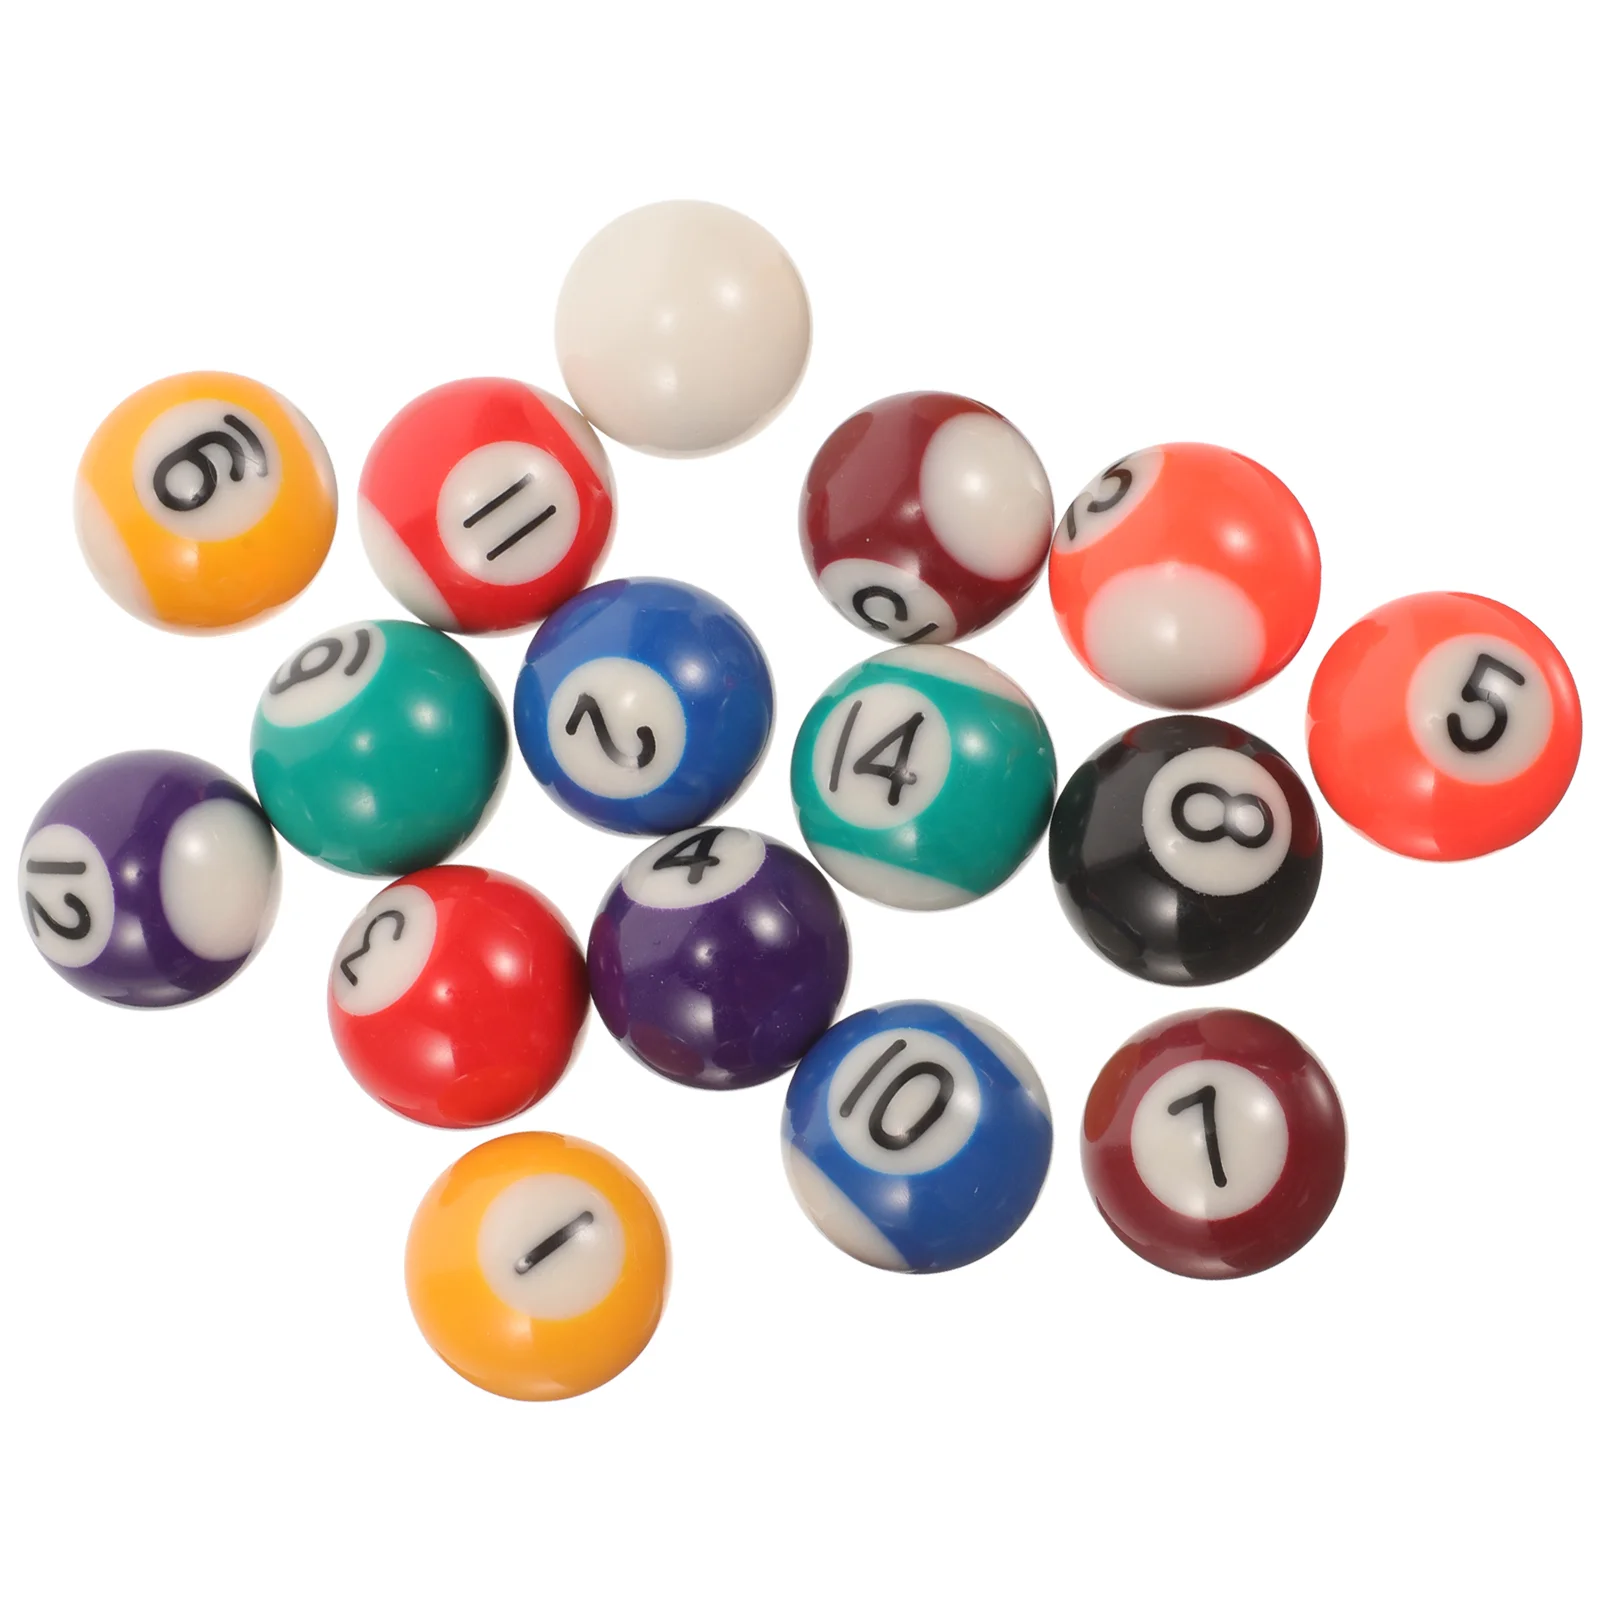 

Childrens Toy Children's Billiards Set Engaging Activity for Kids Training Household Table Prop Resin Balls